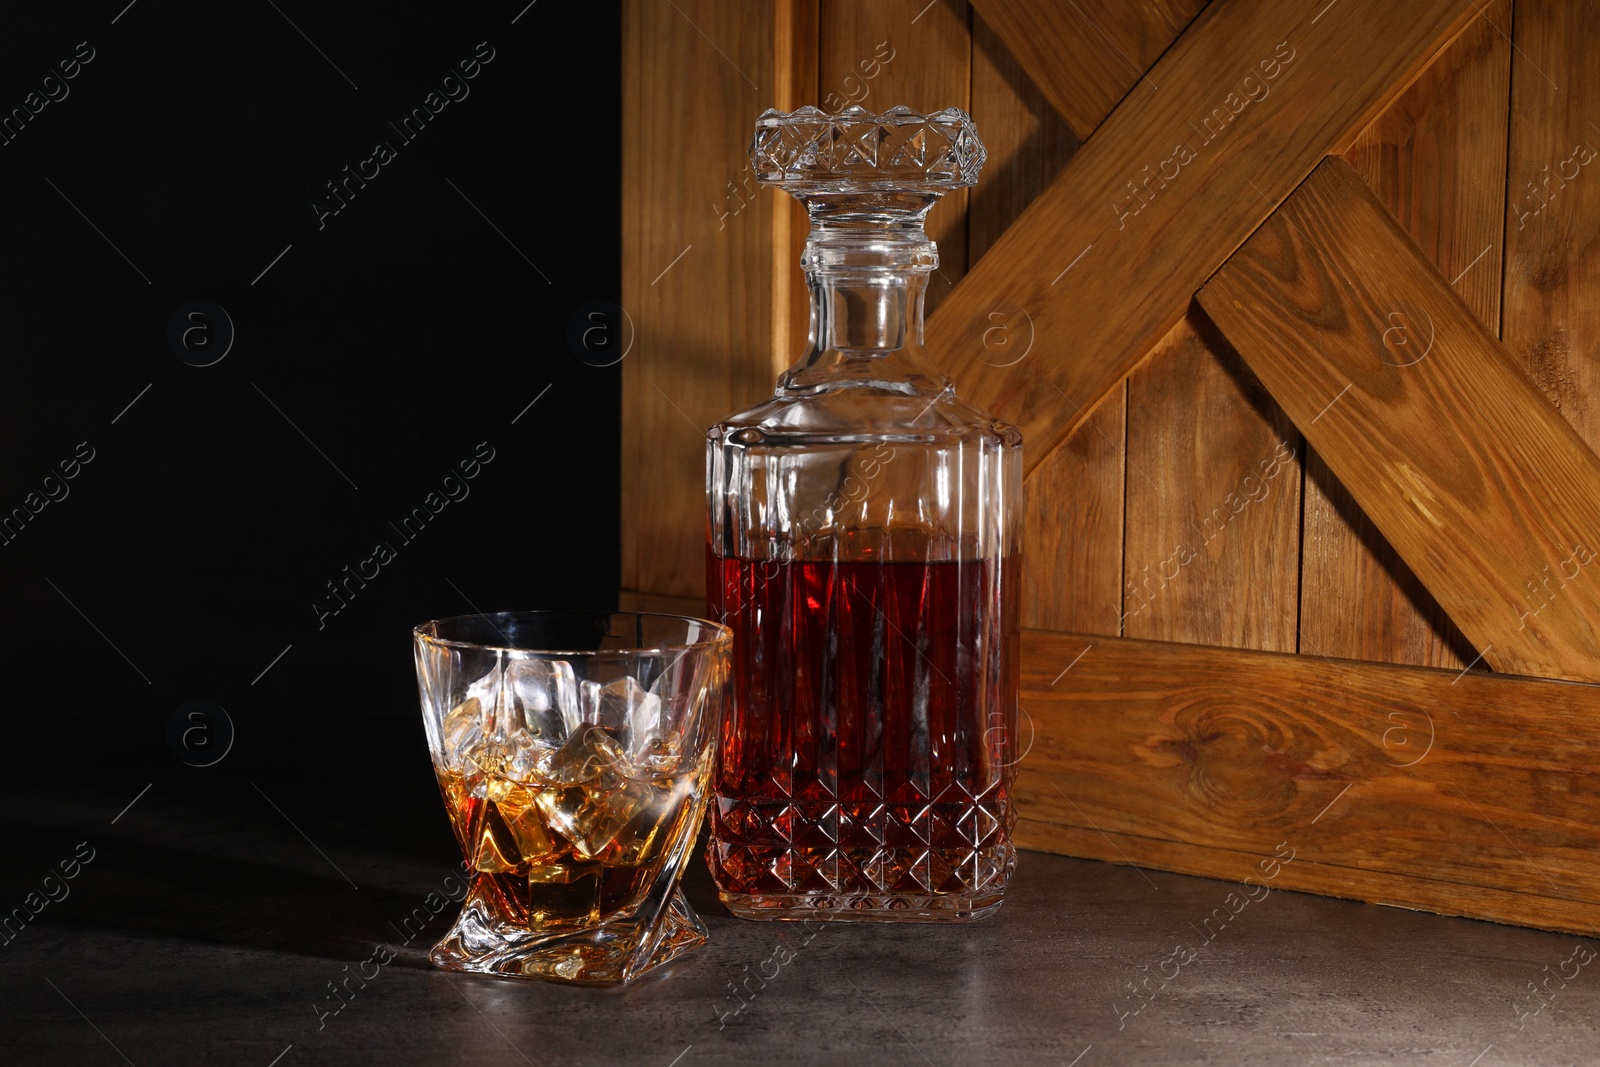 Photo of Whiskey in glass and bottle near wooden crate on dark table against black background